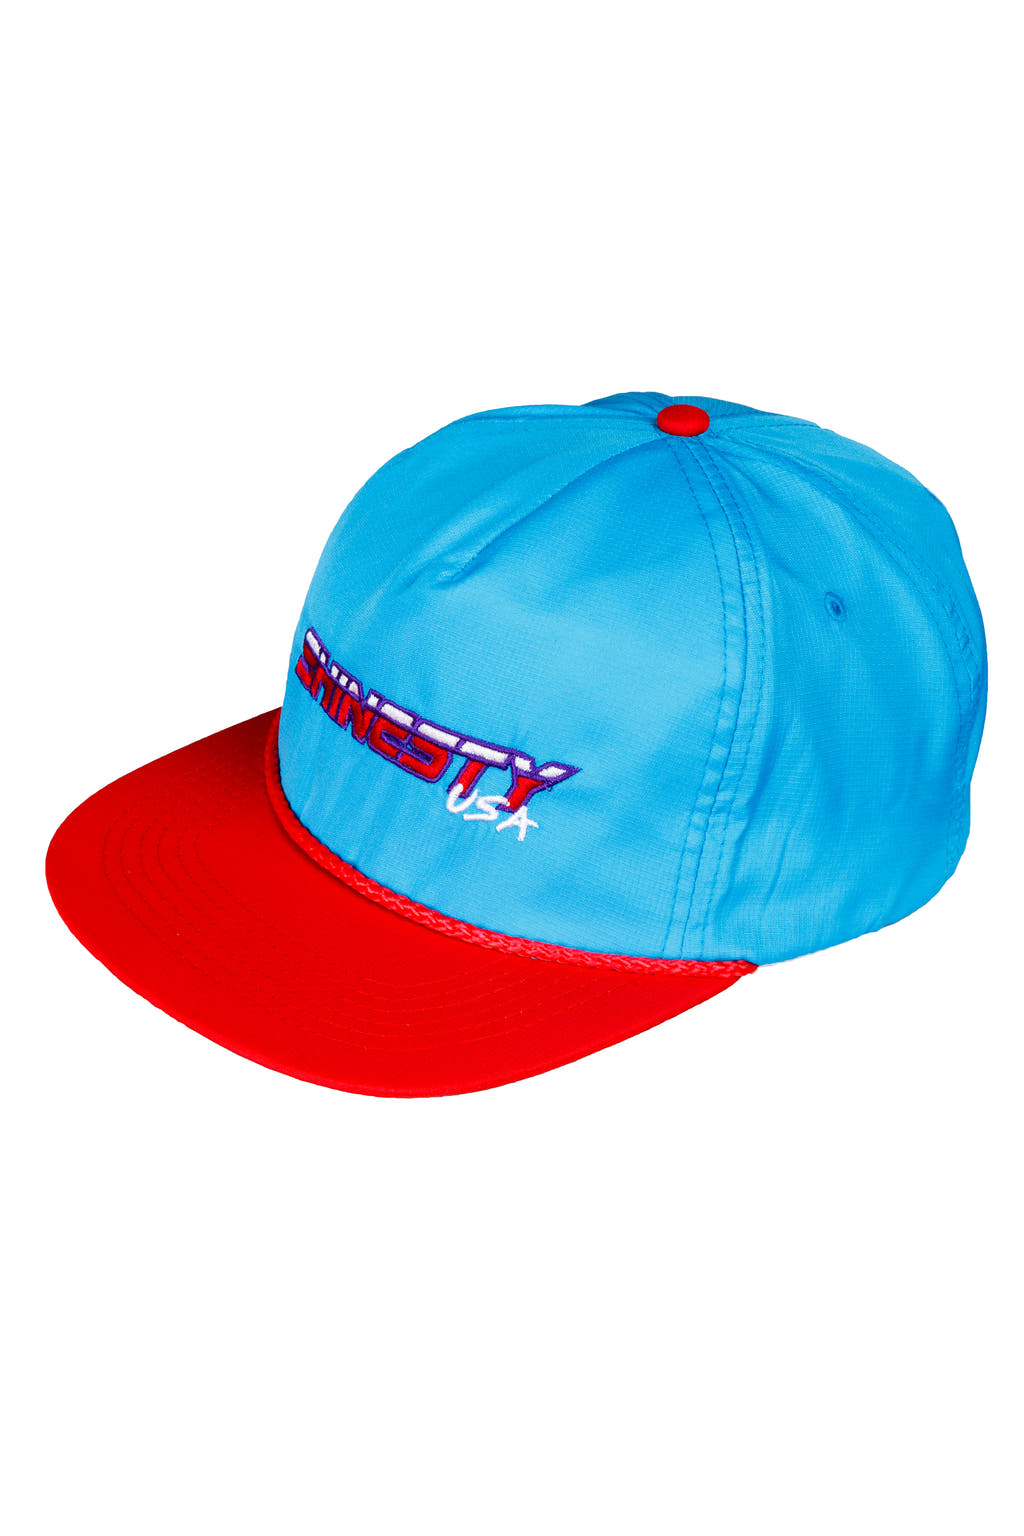 teal and red usa hat